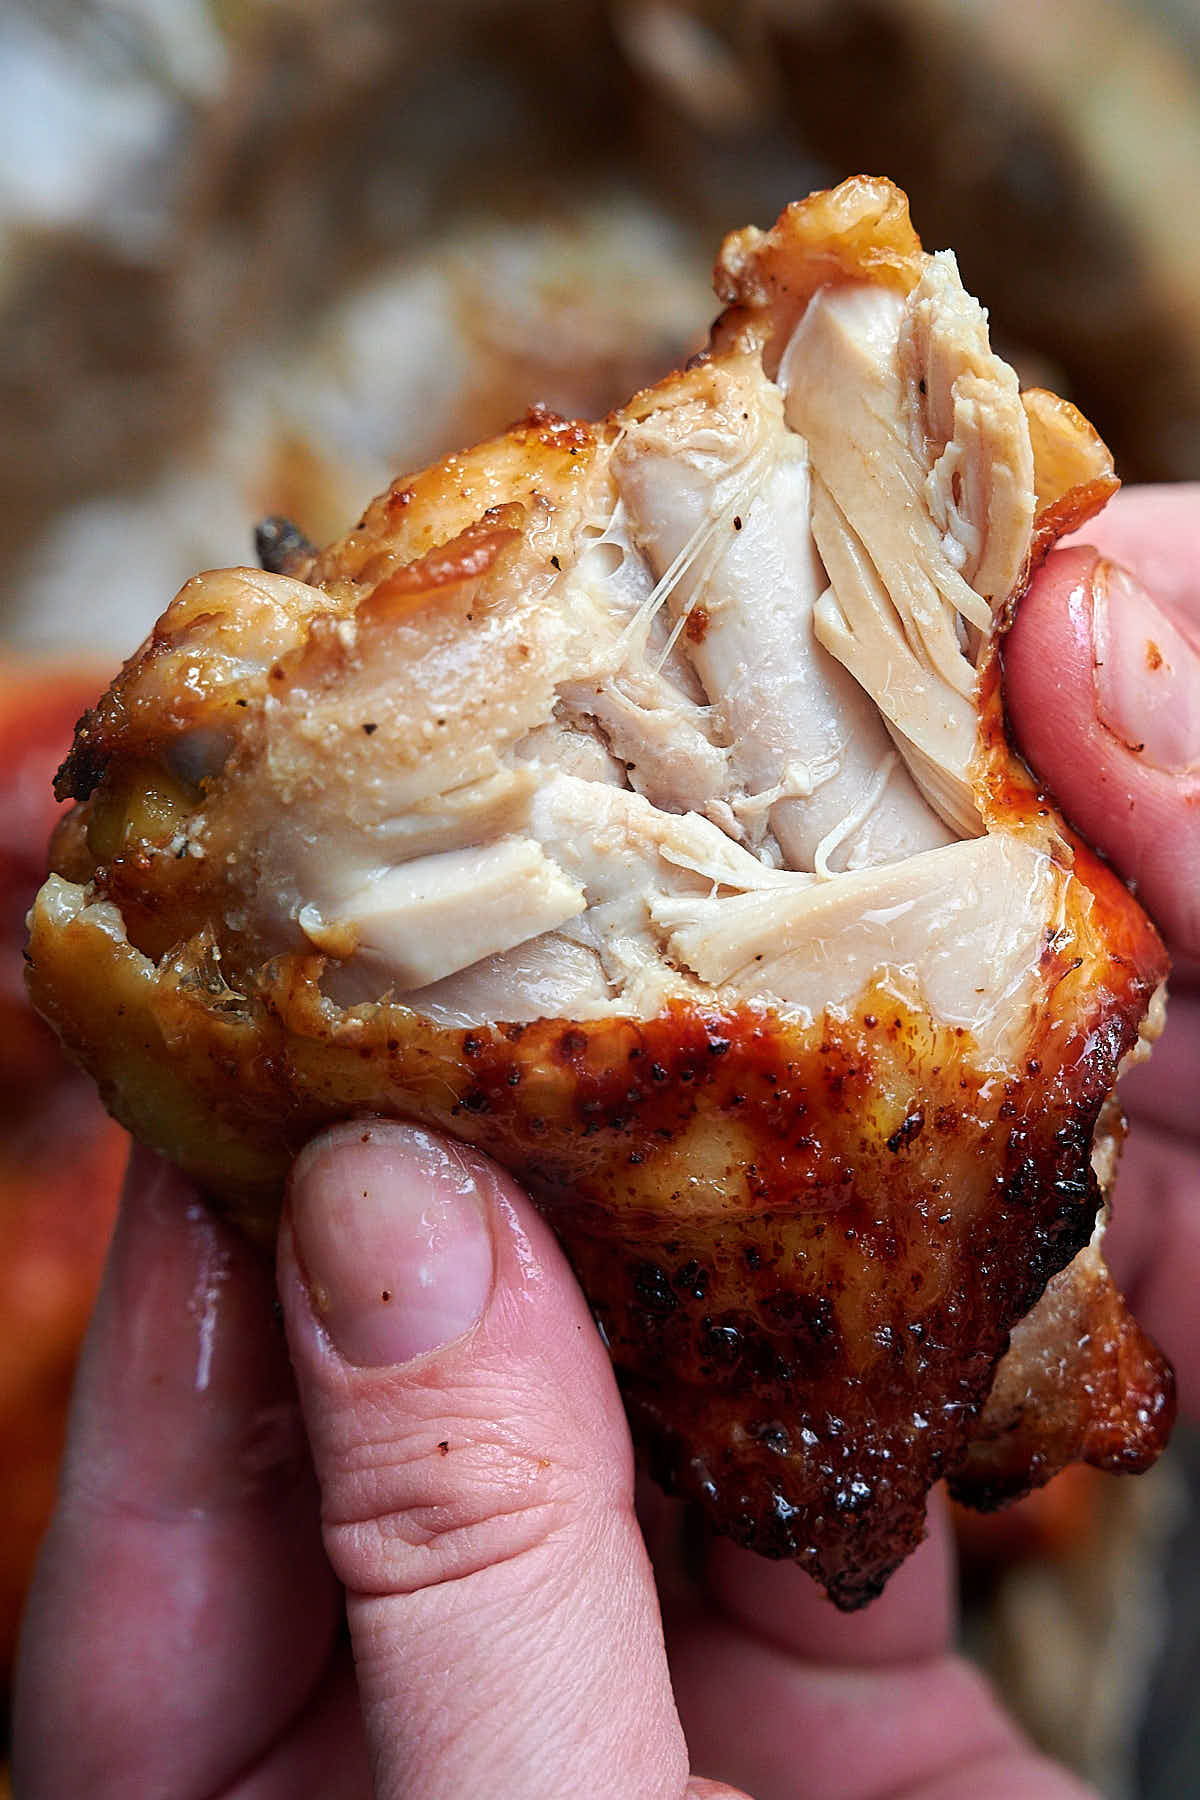 A close up of air fried chicken thighs split open, showing juicy, moist meat.